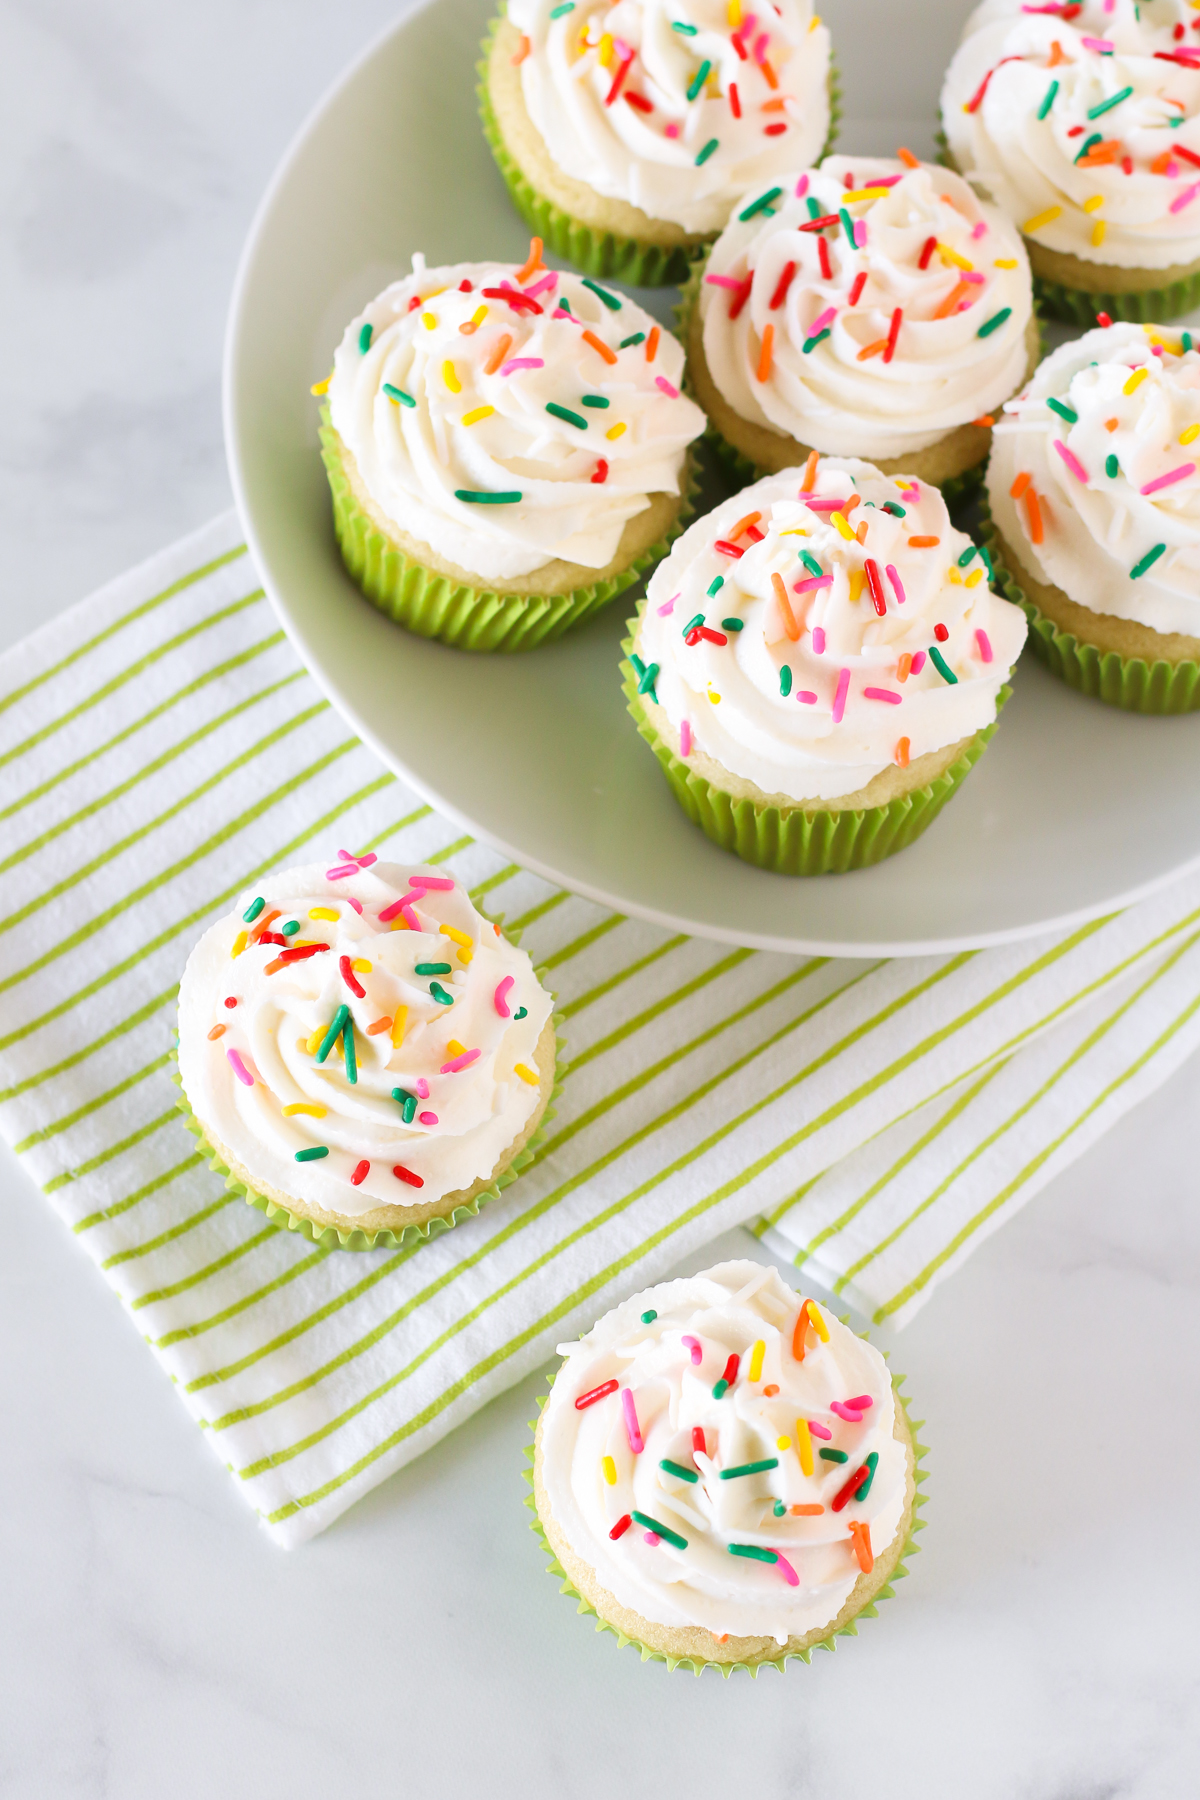 Gluten Free Vegan Vanilla Cupcakes. Light, fluffy cupcakes with a whipped, creamy vanilla buttercream. Allergen free and perfect for any celebration!